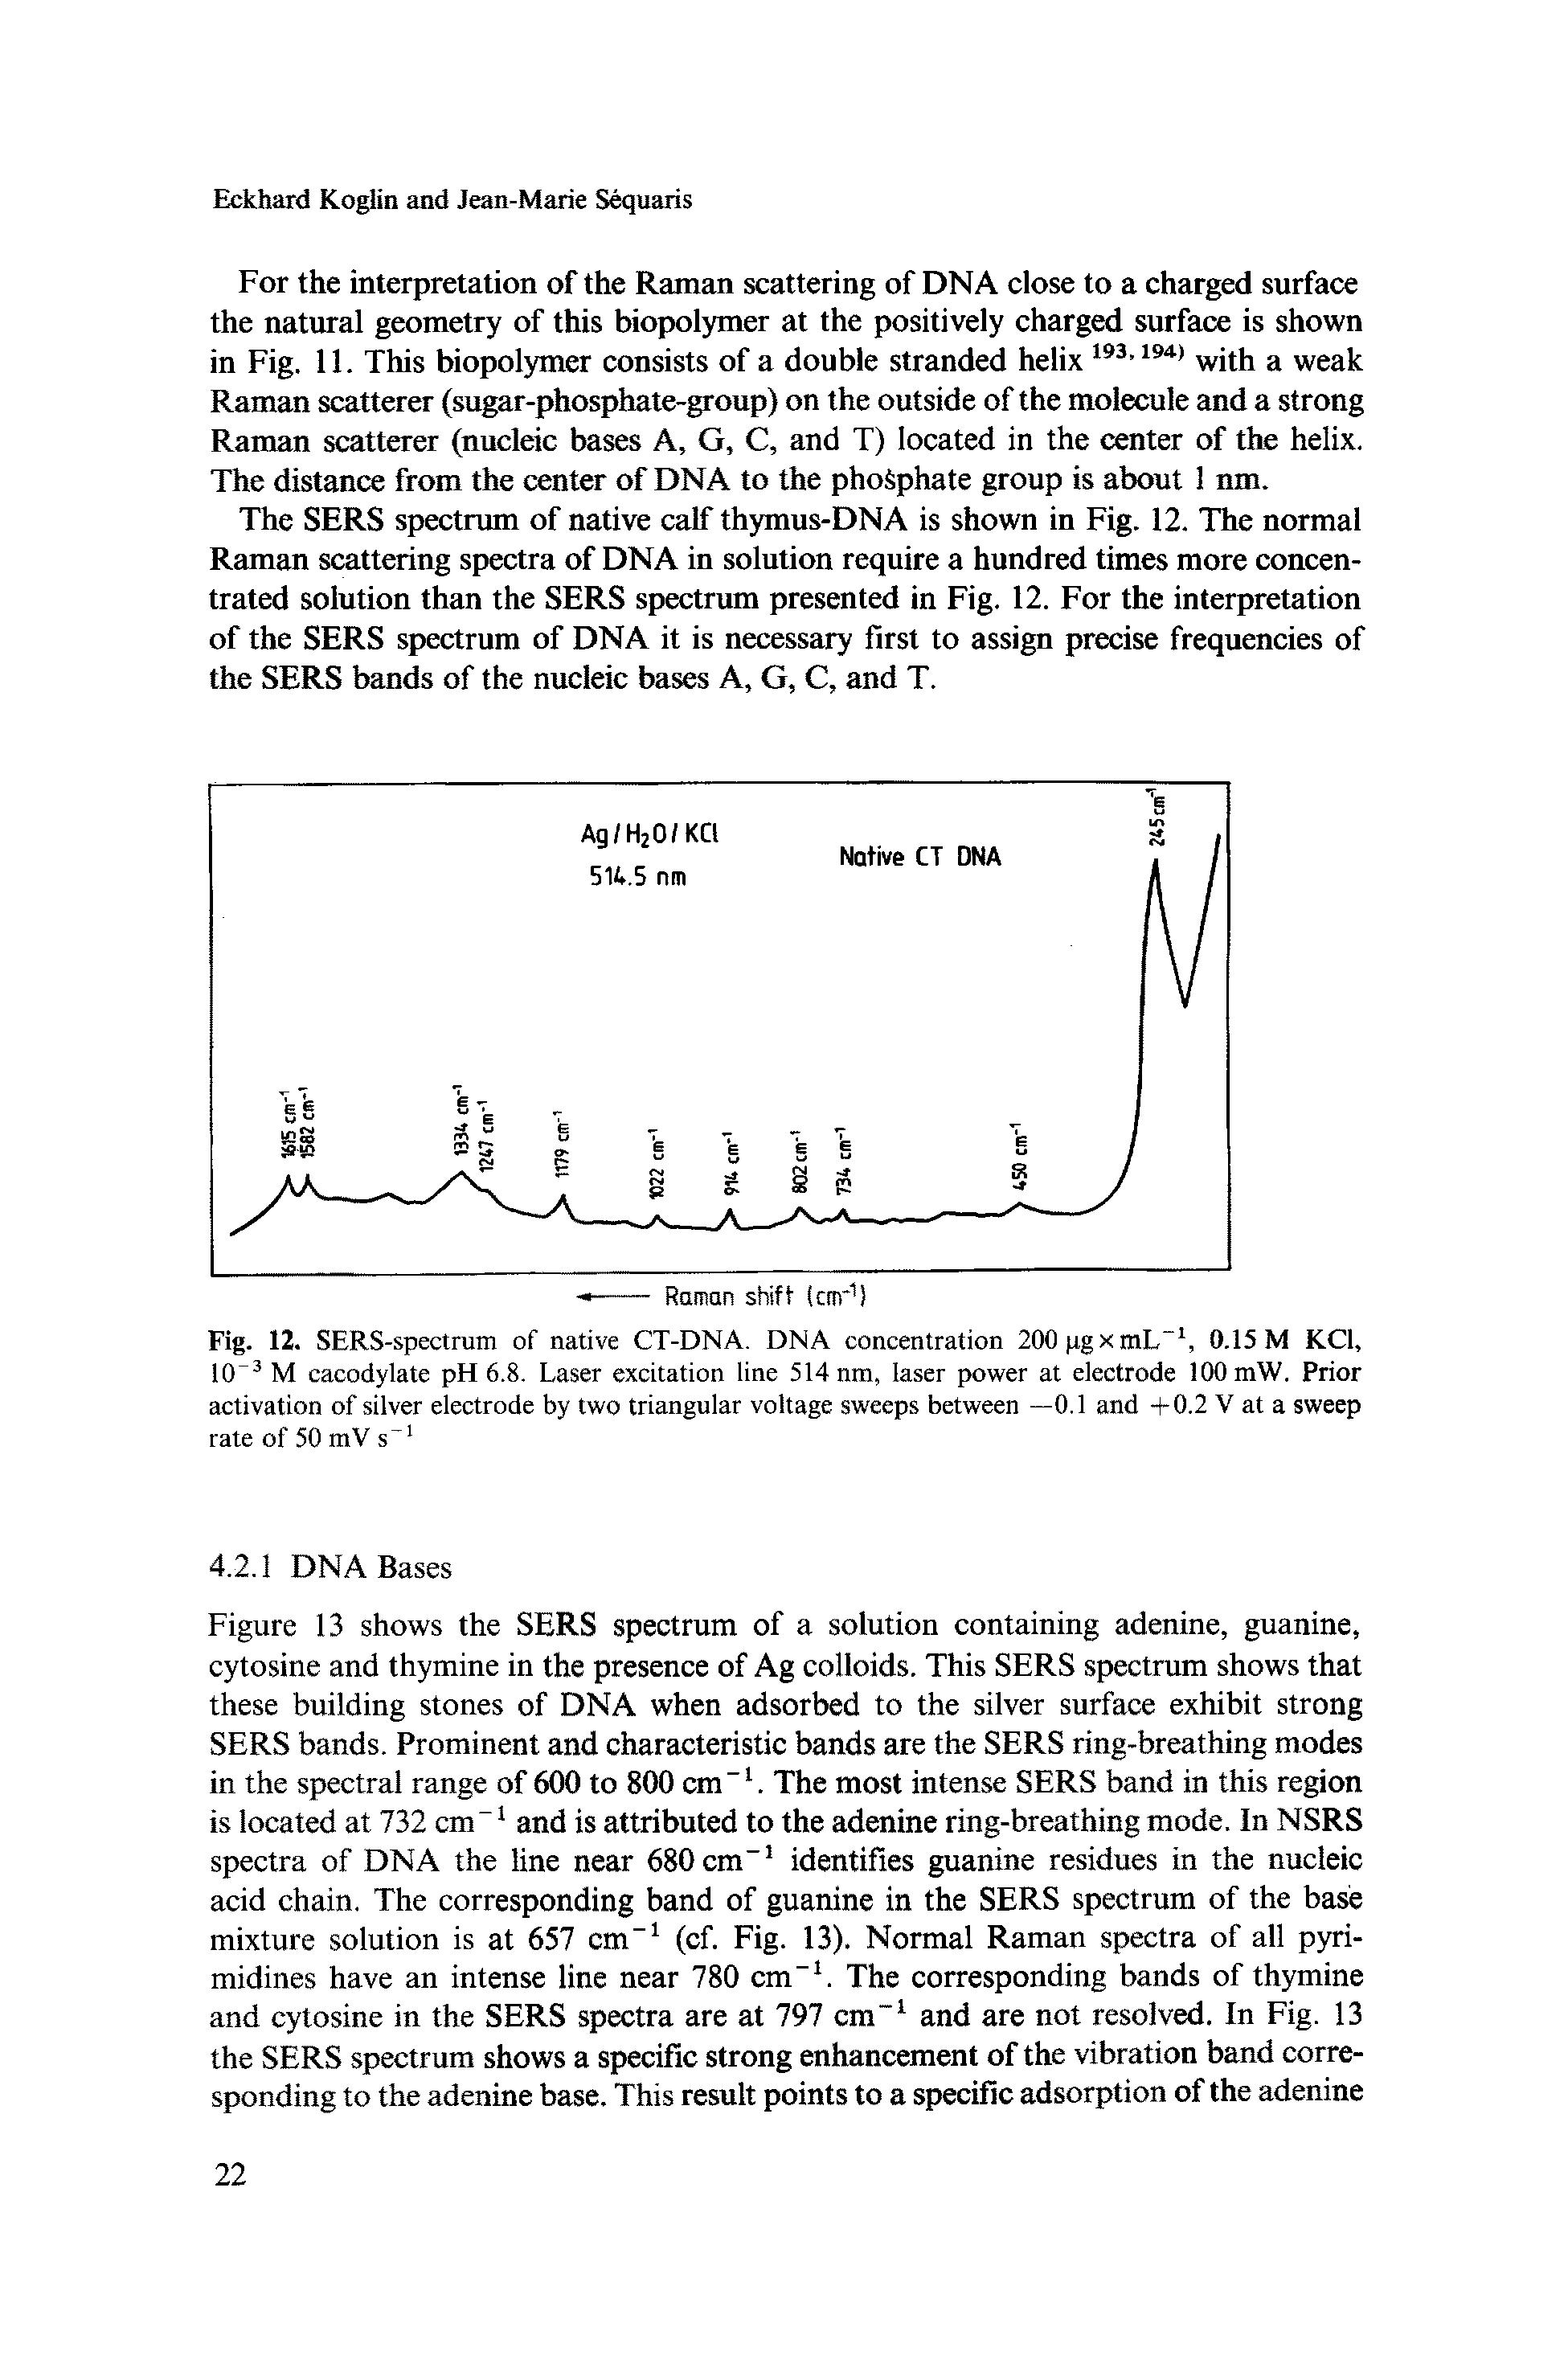 Fig. 12. SERS-spectrum of native CT-DNA. DNA concentration 200 pgxmL, 0.15 M KCl, 10 M cacodylate pH 6.8. Laser excitation line 514 nm, laser power at electrode 100 mW. Prior activation of silver electrode by two triangular voltage sweeps between —0.1 and +0.2 V at a sweep rate of 50 mV s ...